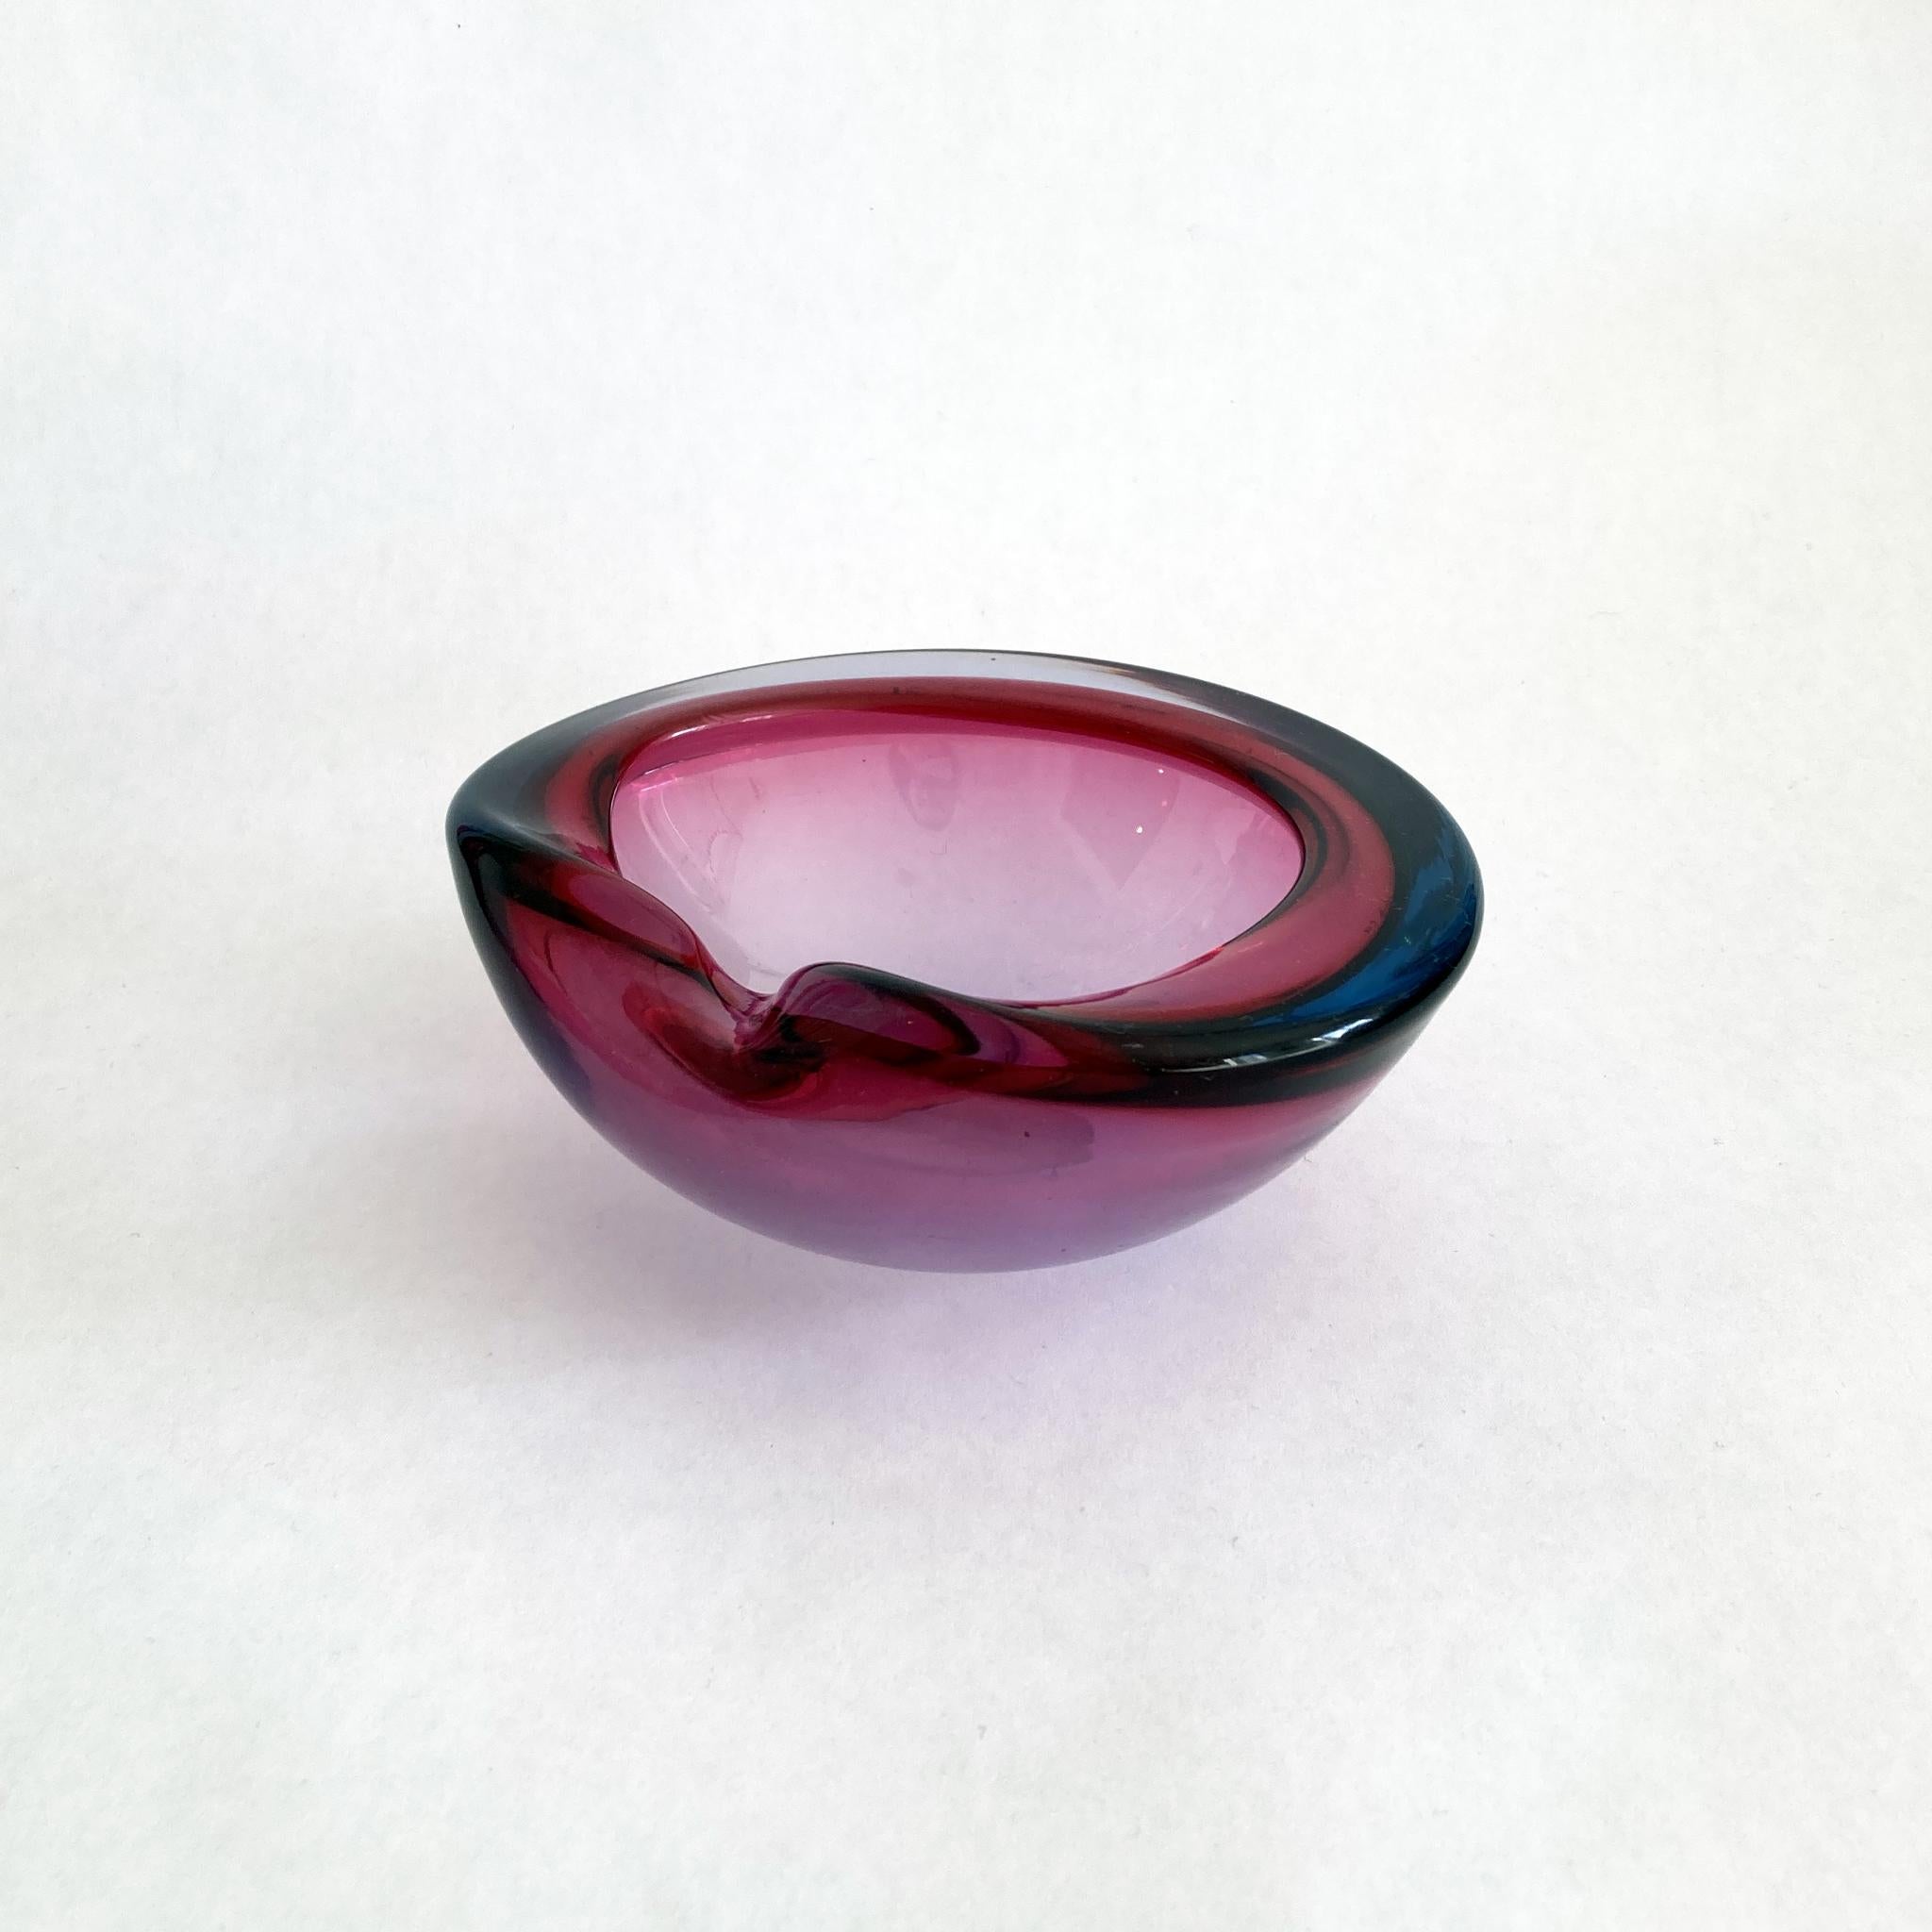 Hand-Crafted Vintage Murano Sommerso Handblown Bowl Catchall in Blue and Magenta Pink Glass